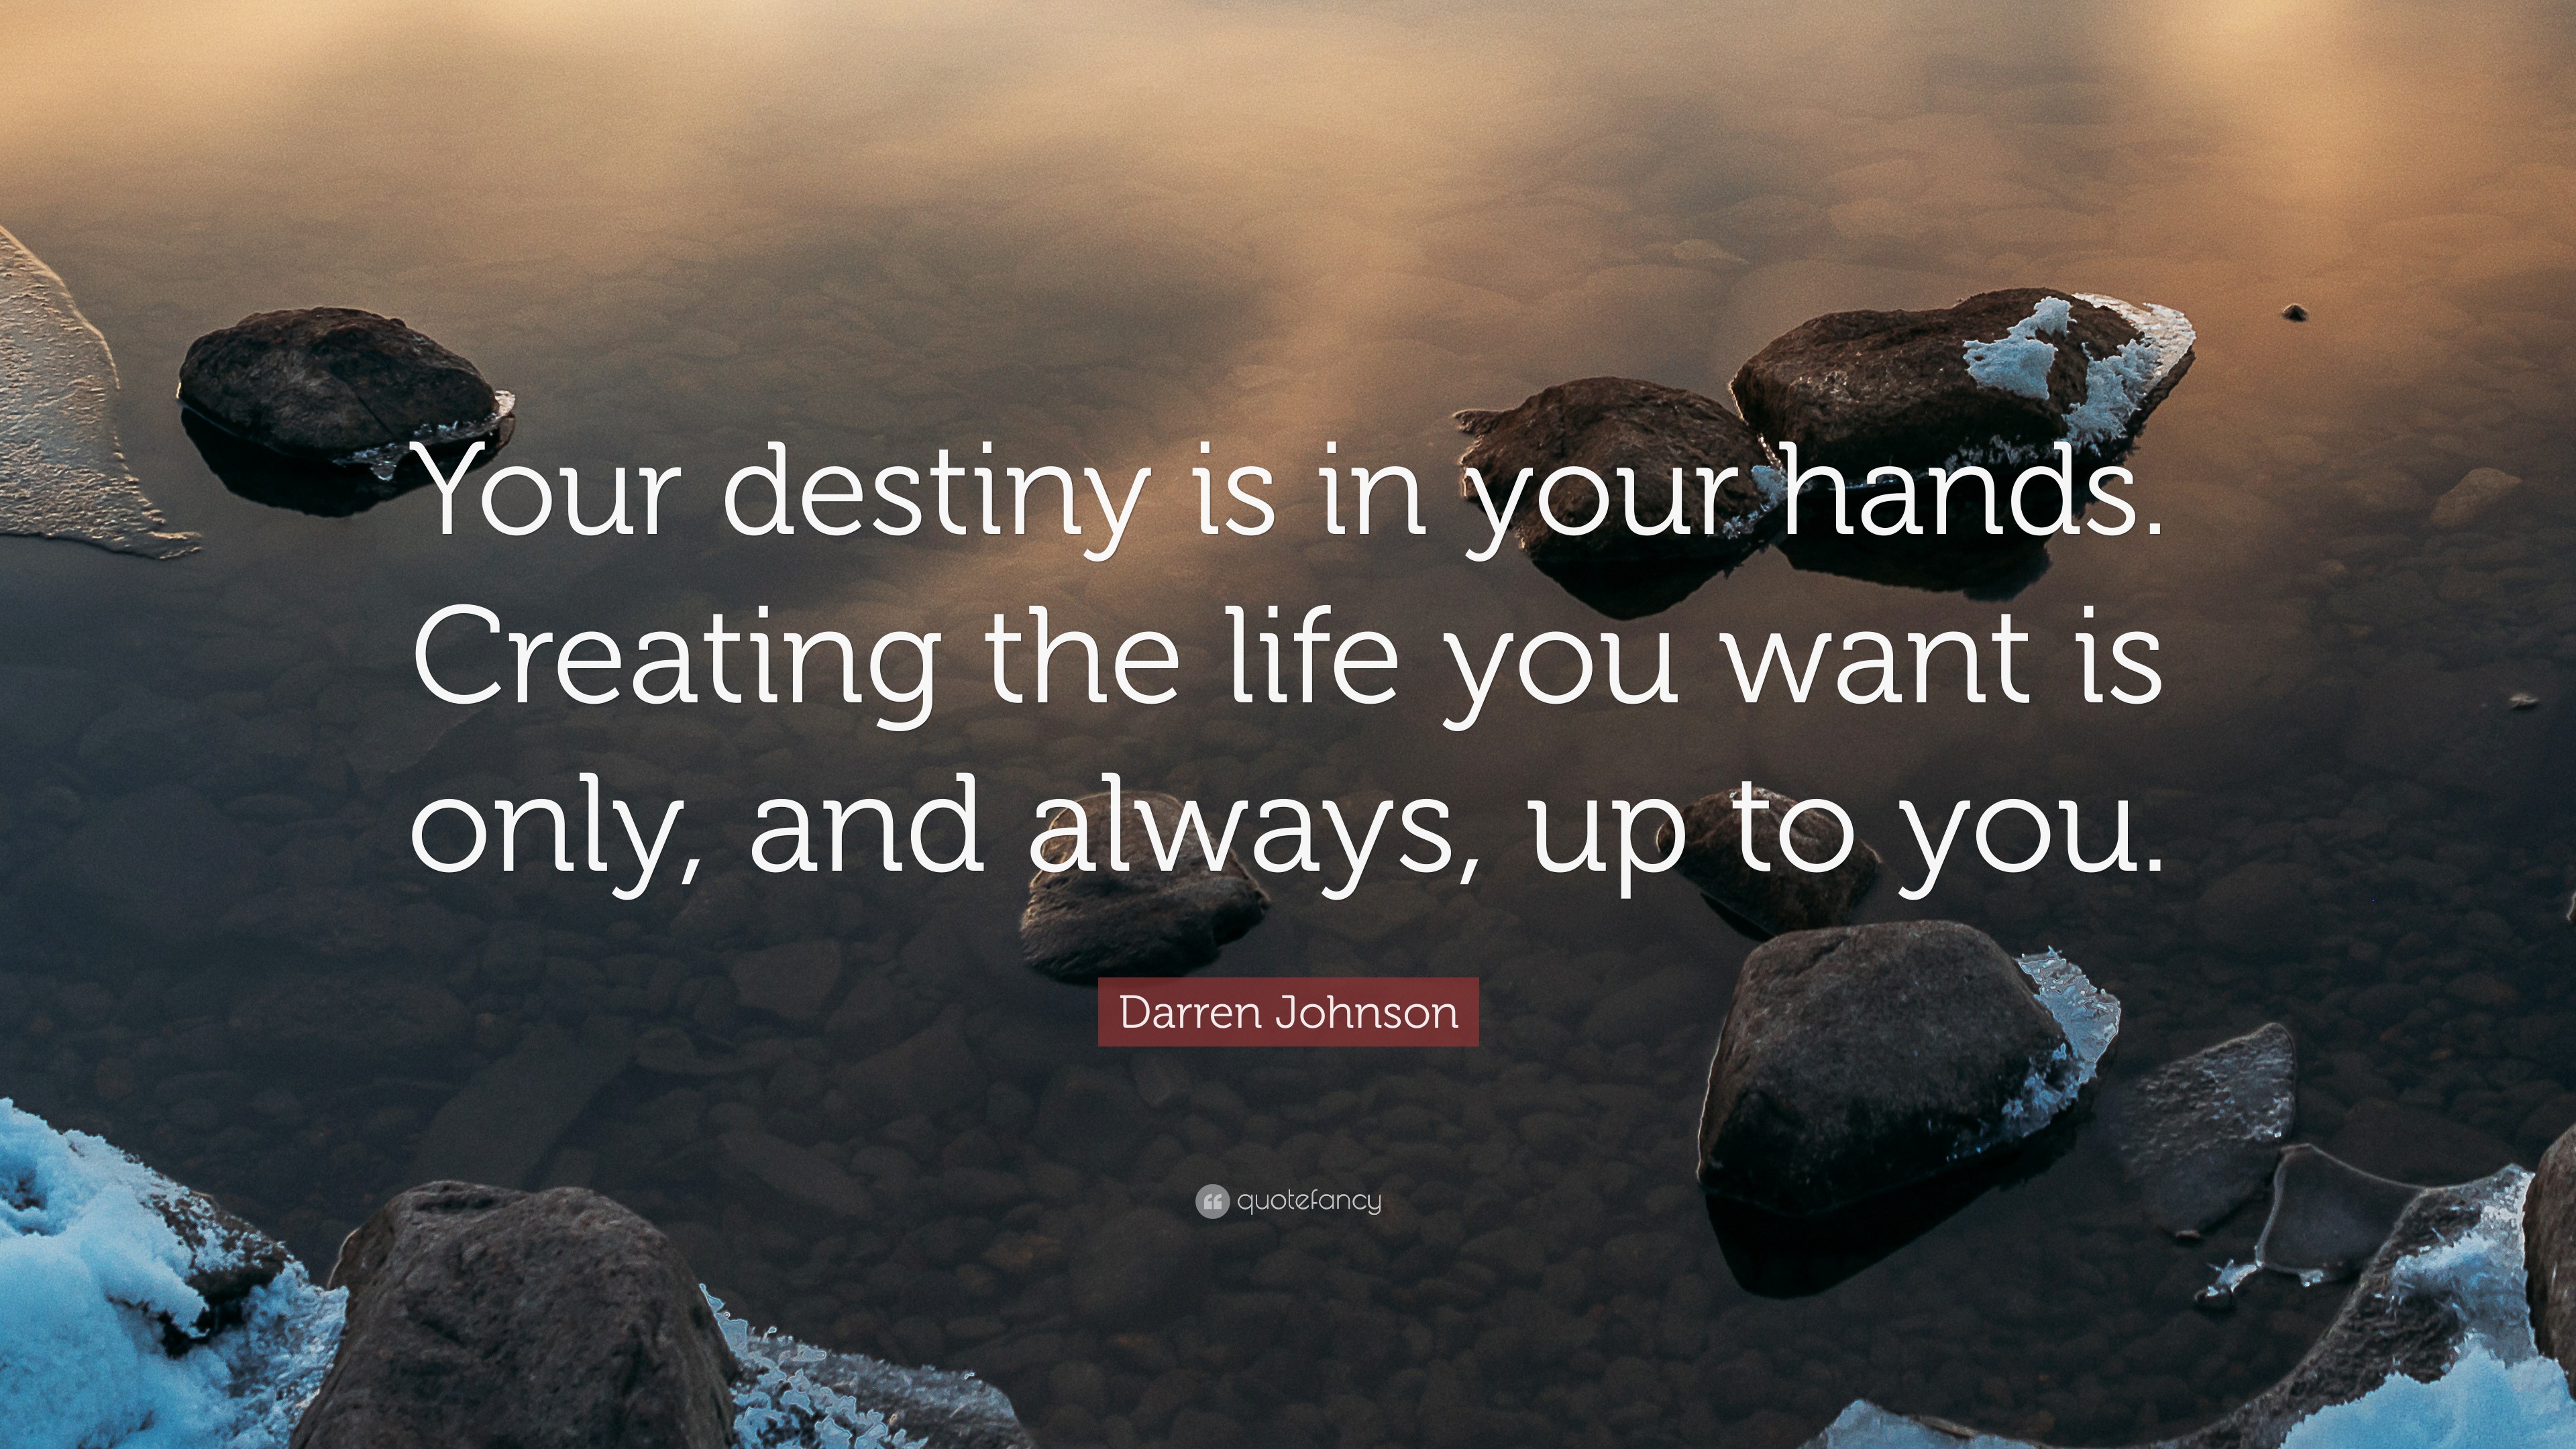 Darren Johnson Quote: “Your destiny is in your hands. Creating the